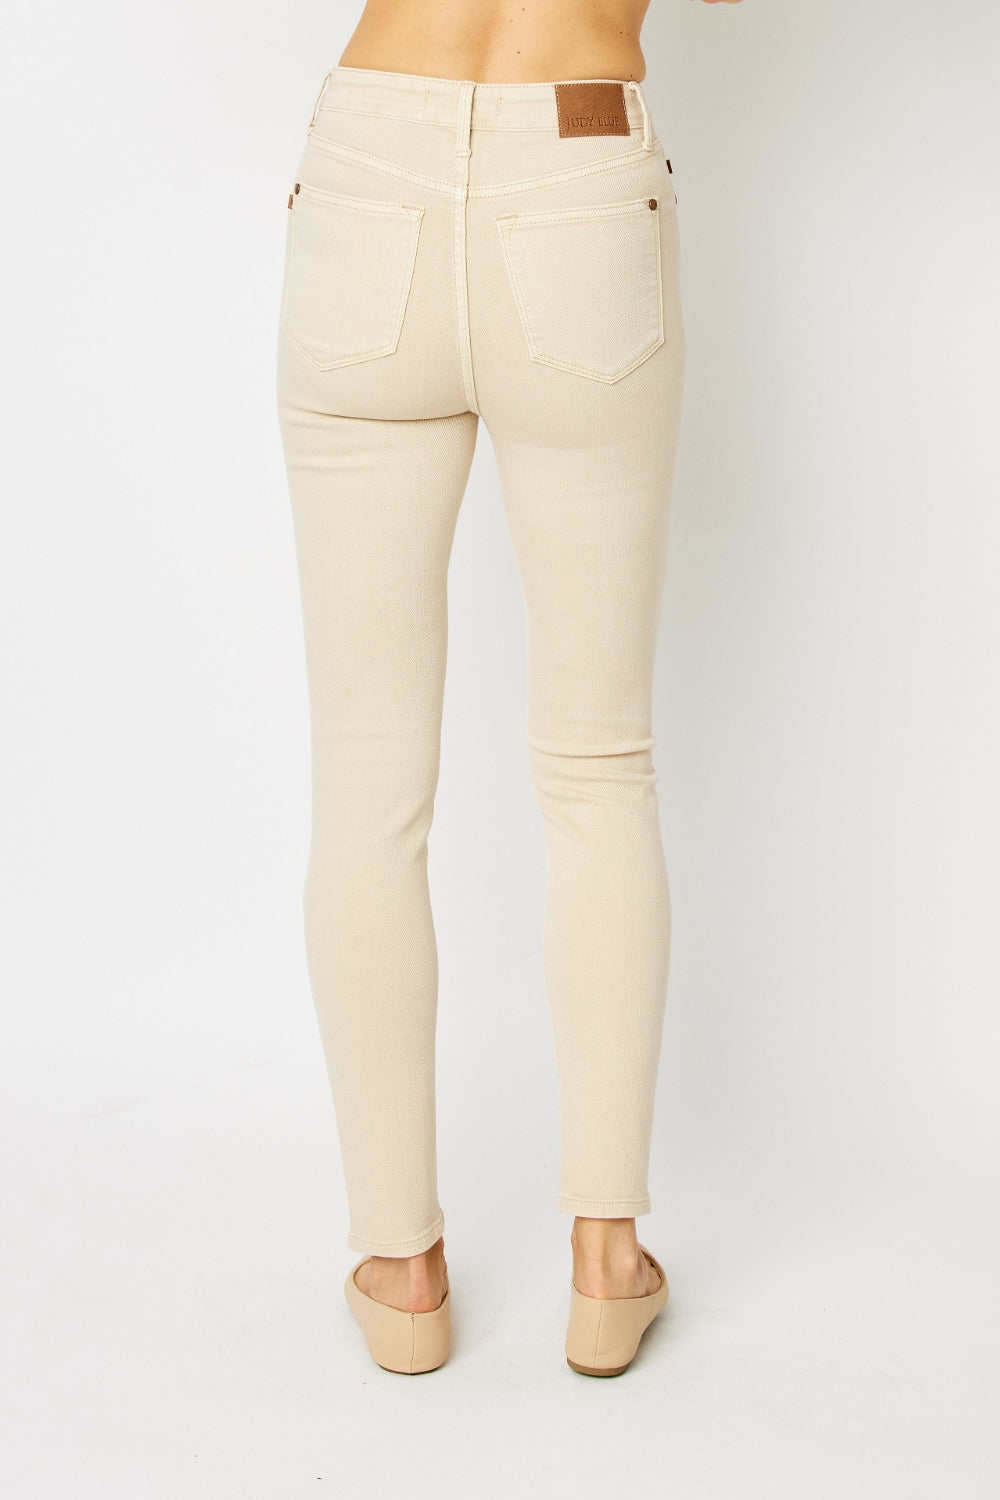 Judy Blue Full Size Garment Dyed Tummy Control Skinny Jeans - House of Binx 